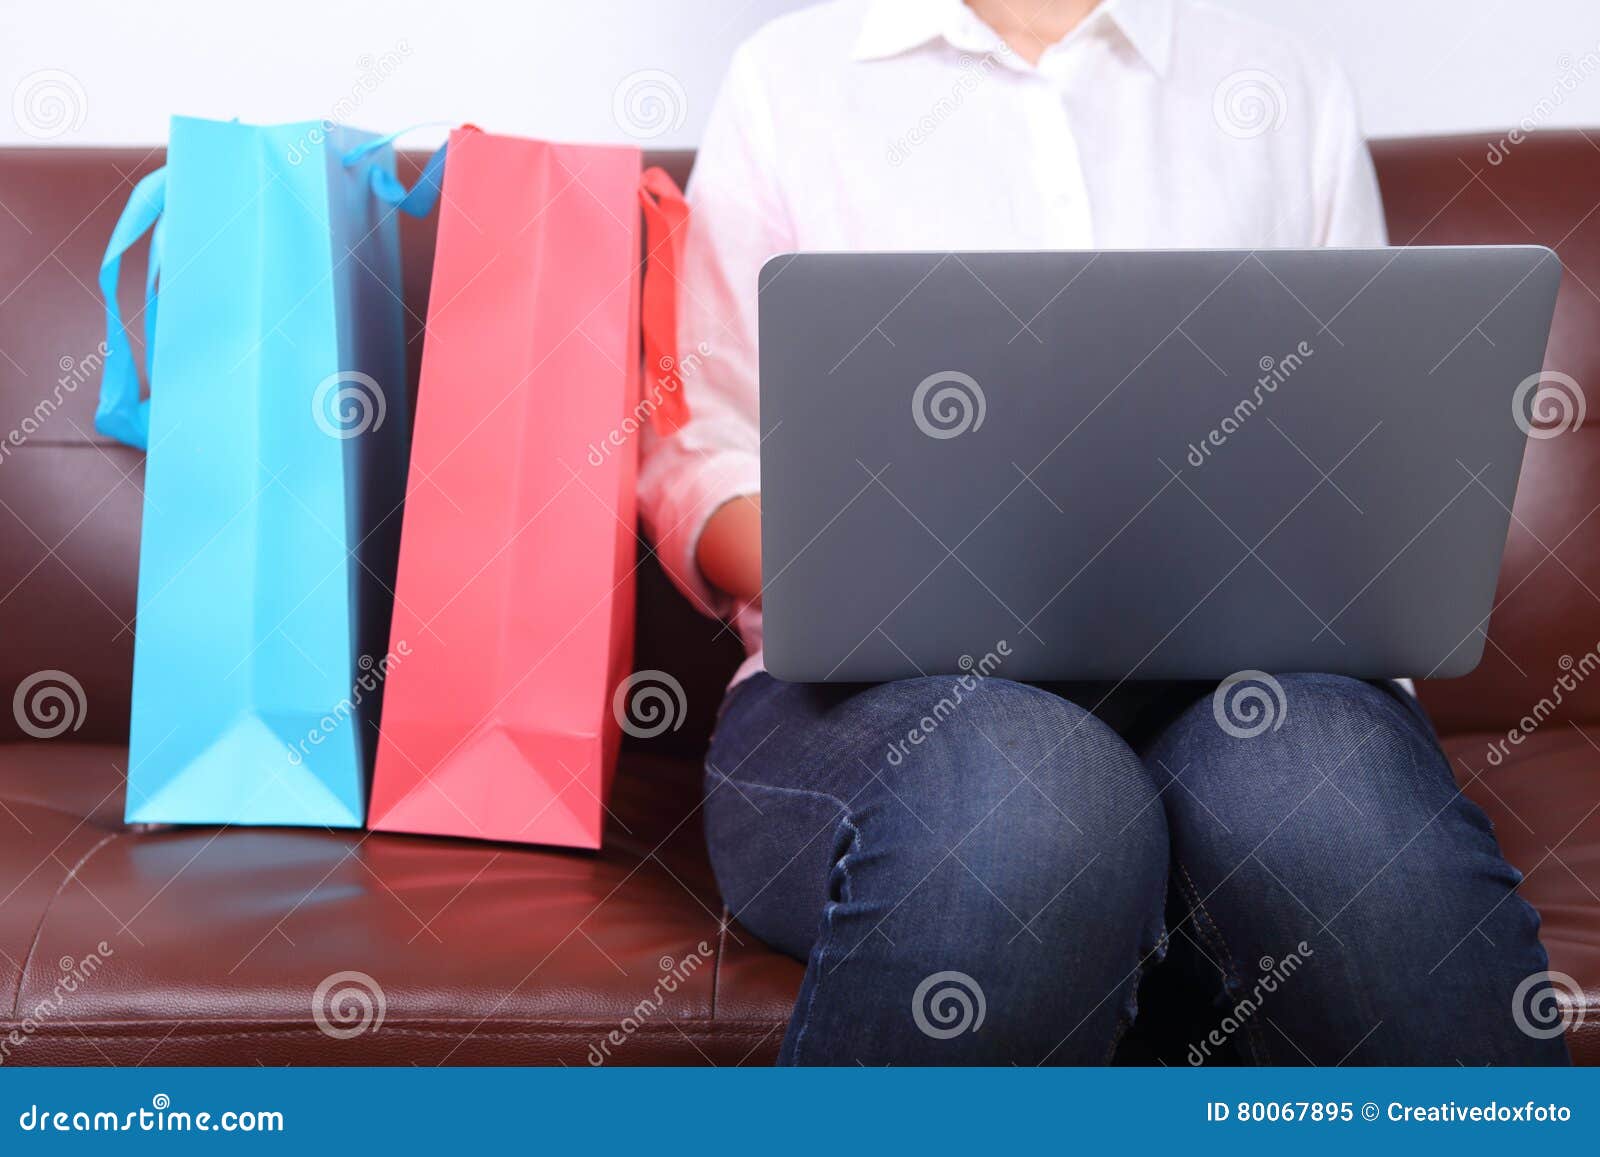 woman sit on sofa with shooping bag beside and using laptop